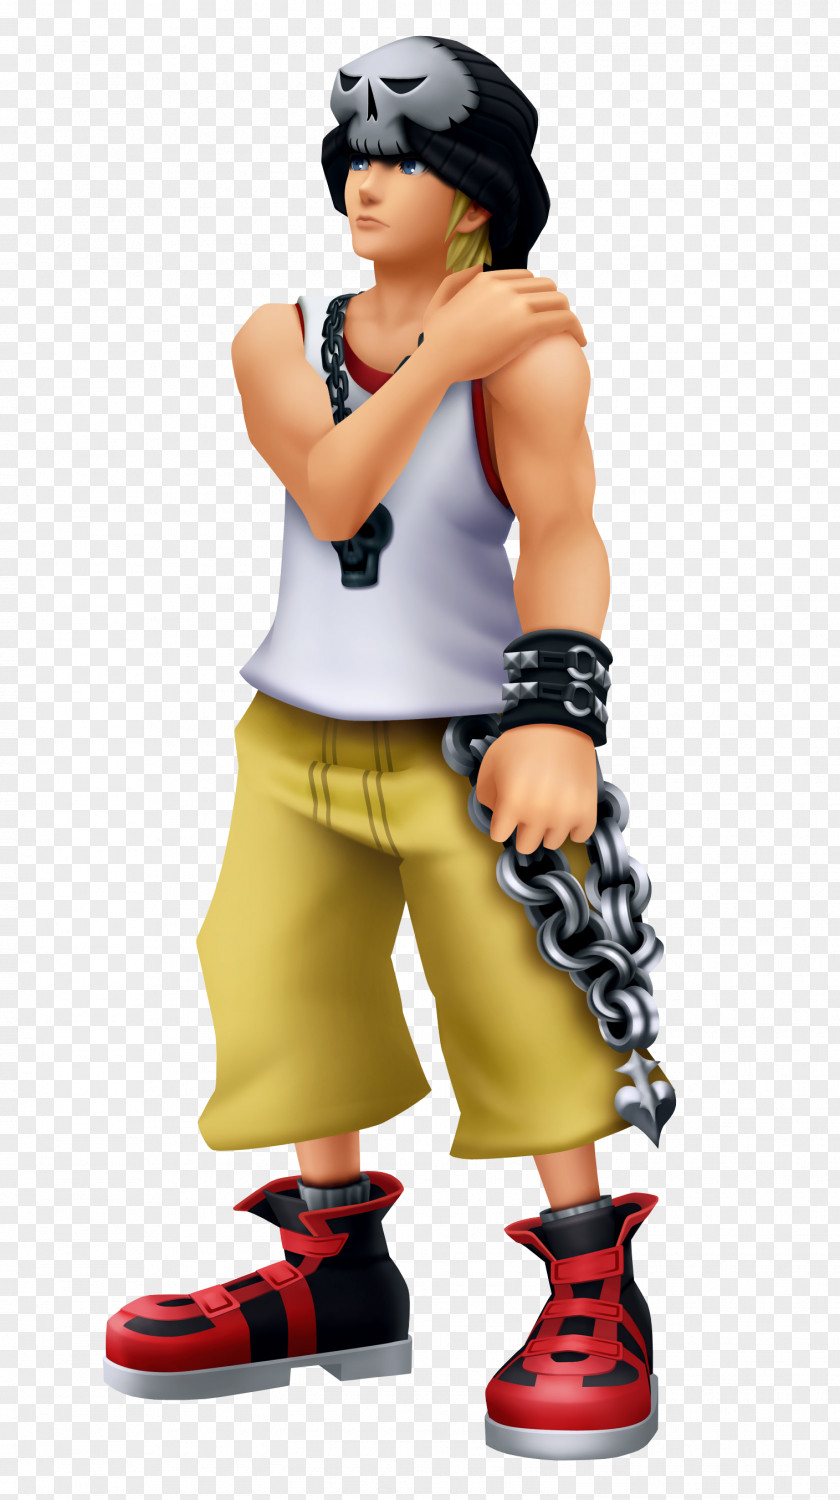 Kingdom Hearts 3D: Dream Drop Distance III The World Ends With You Video Game PNG